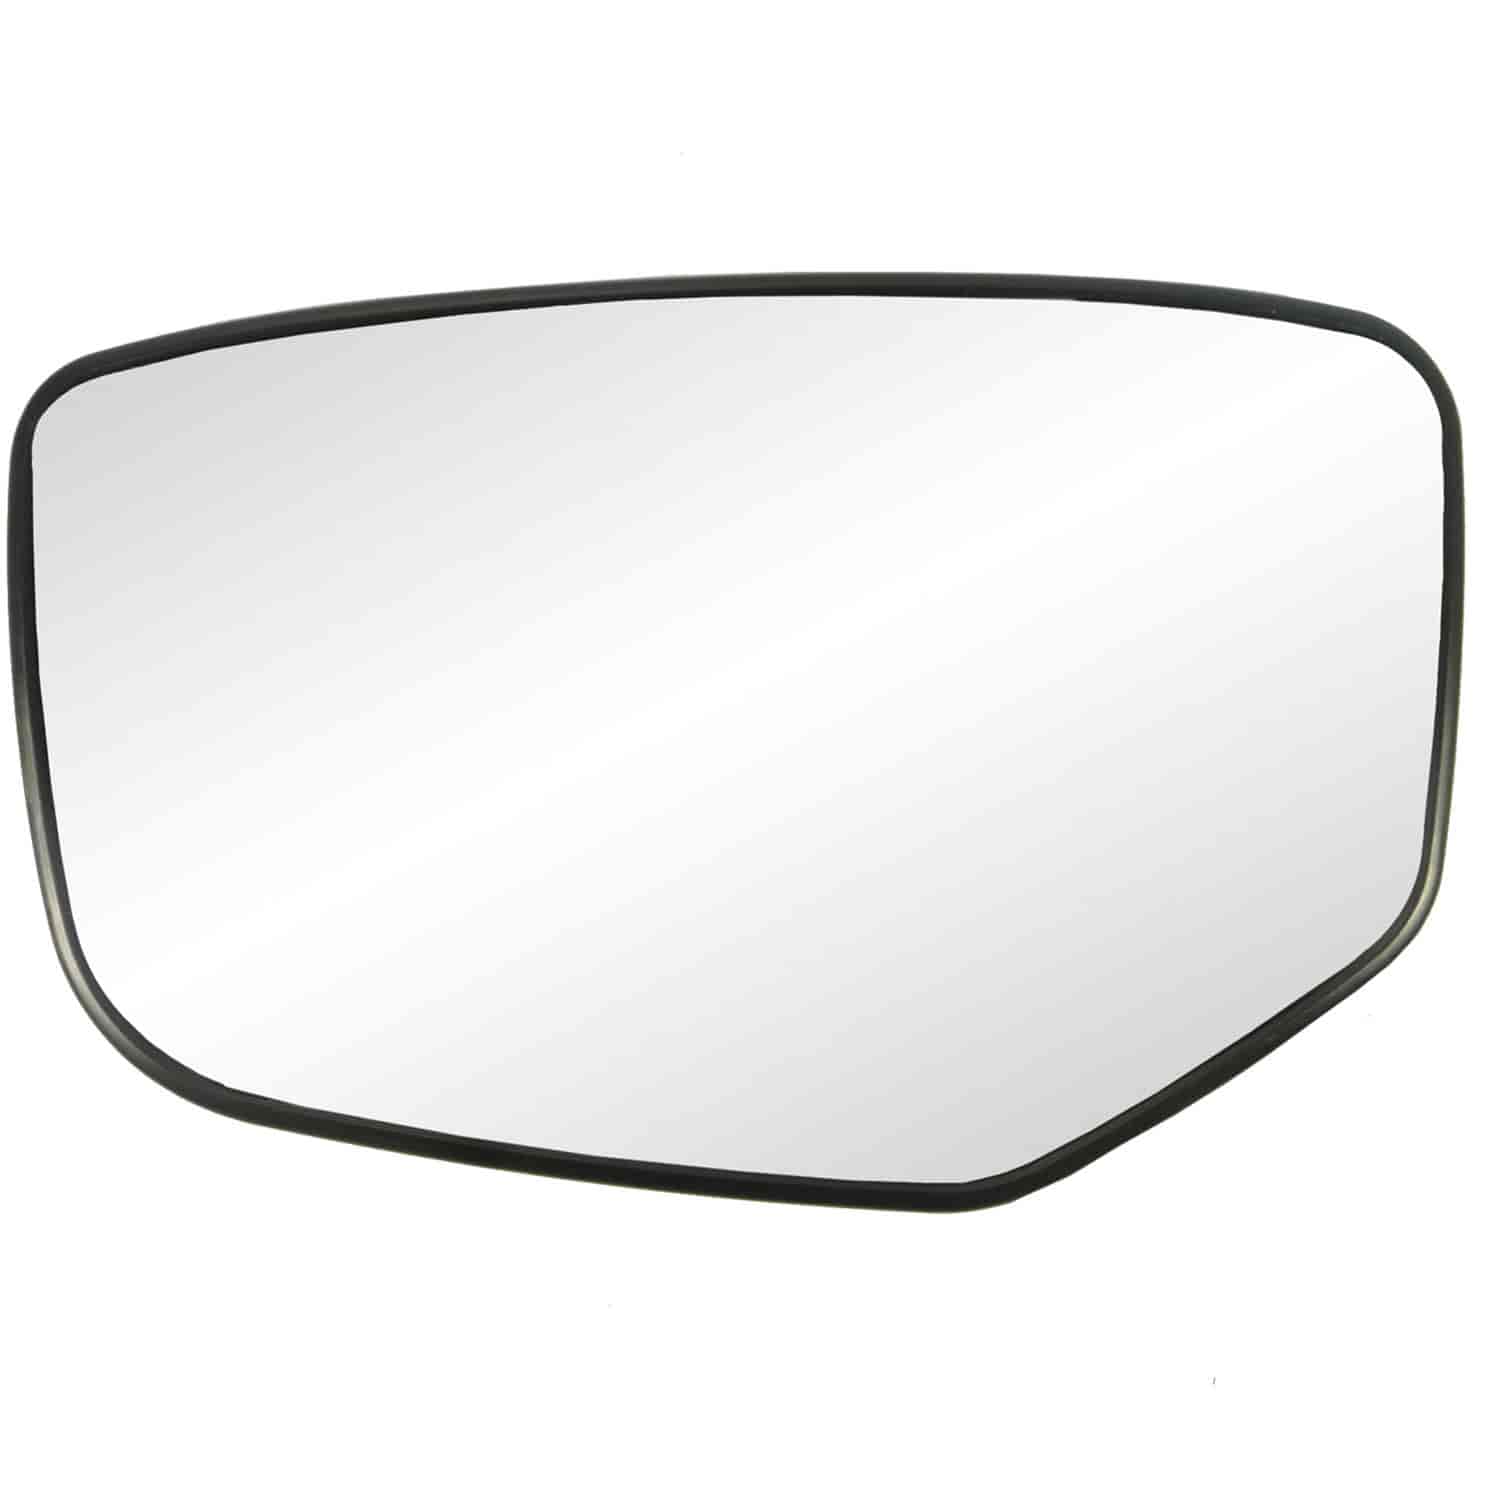 Replacement Glass Assembly for 08-12 Accord replace your cracked or broken driver side mirror glass